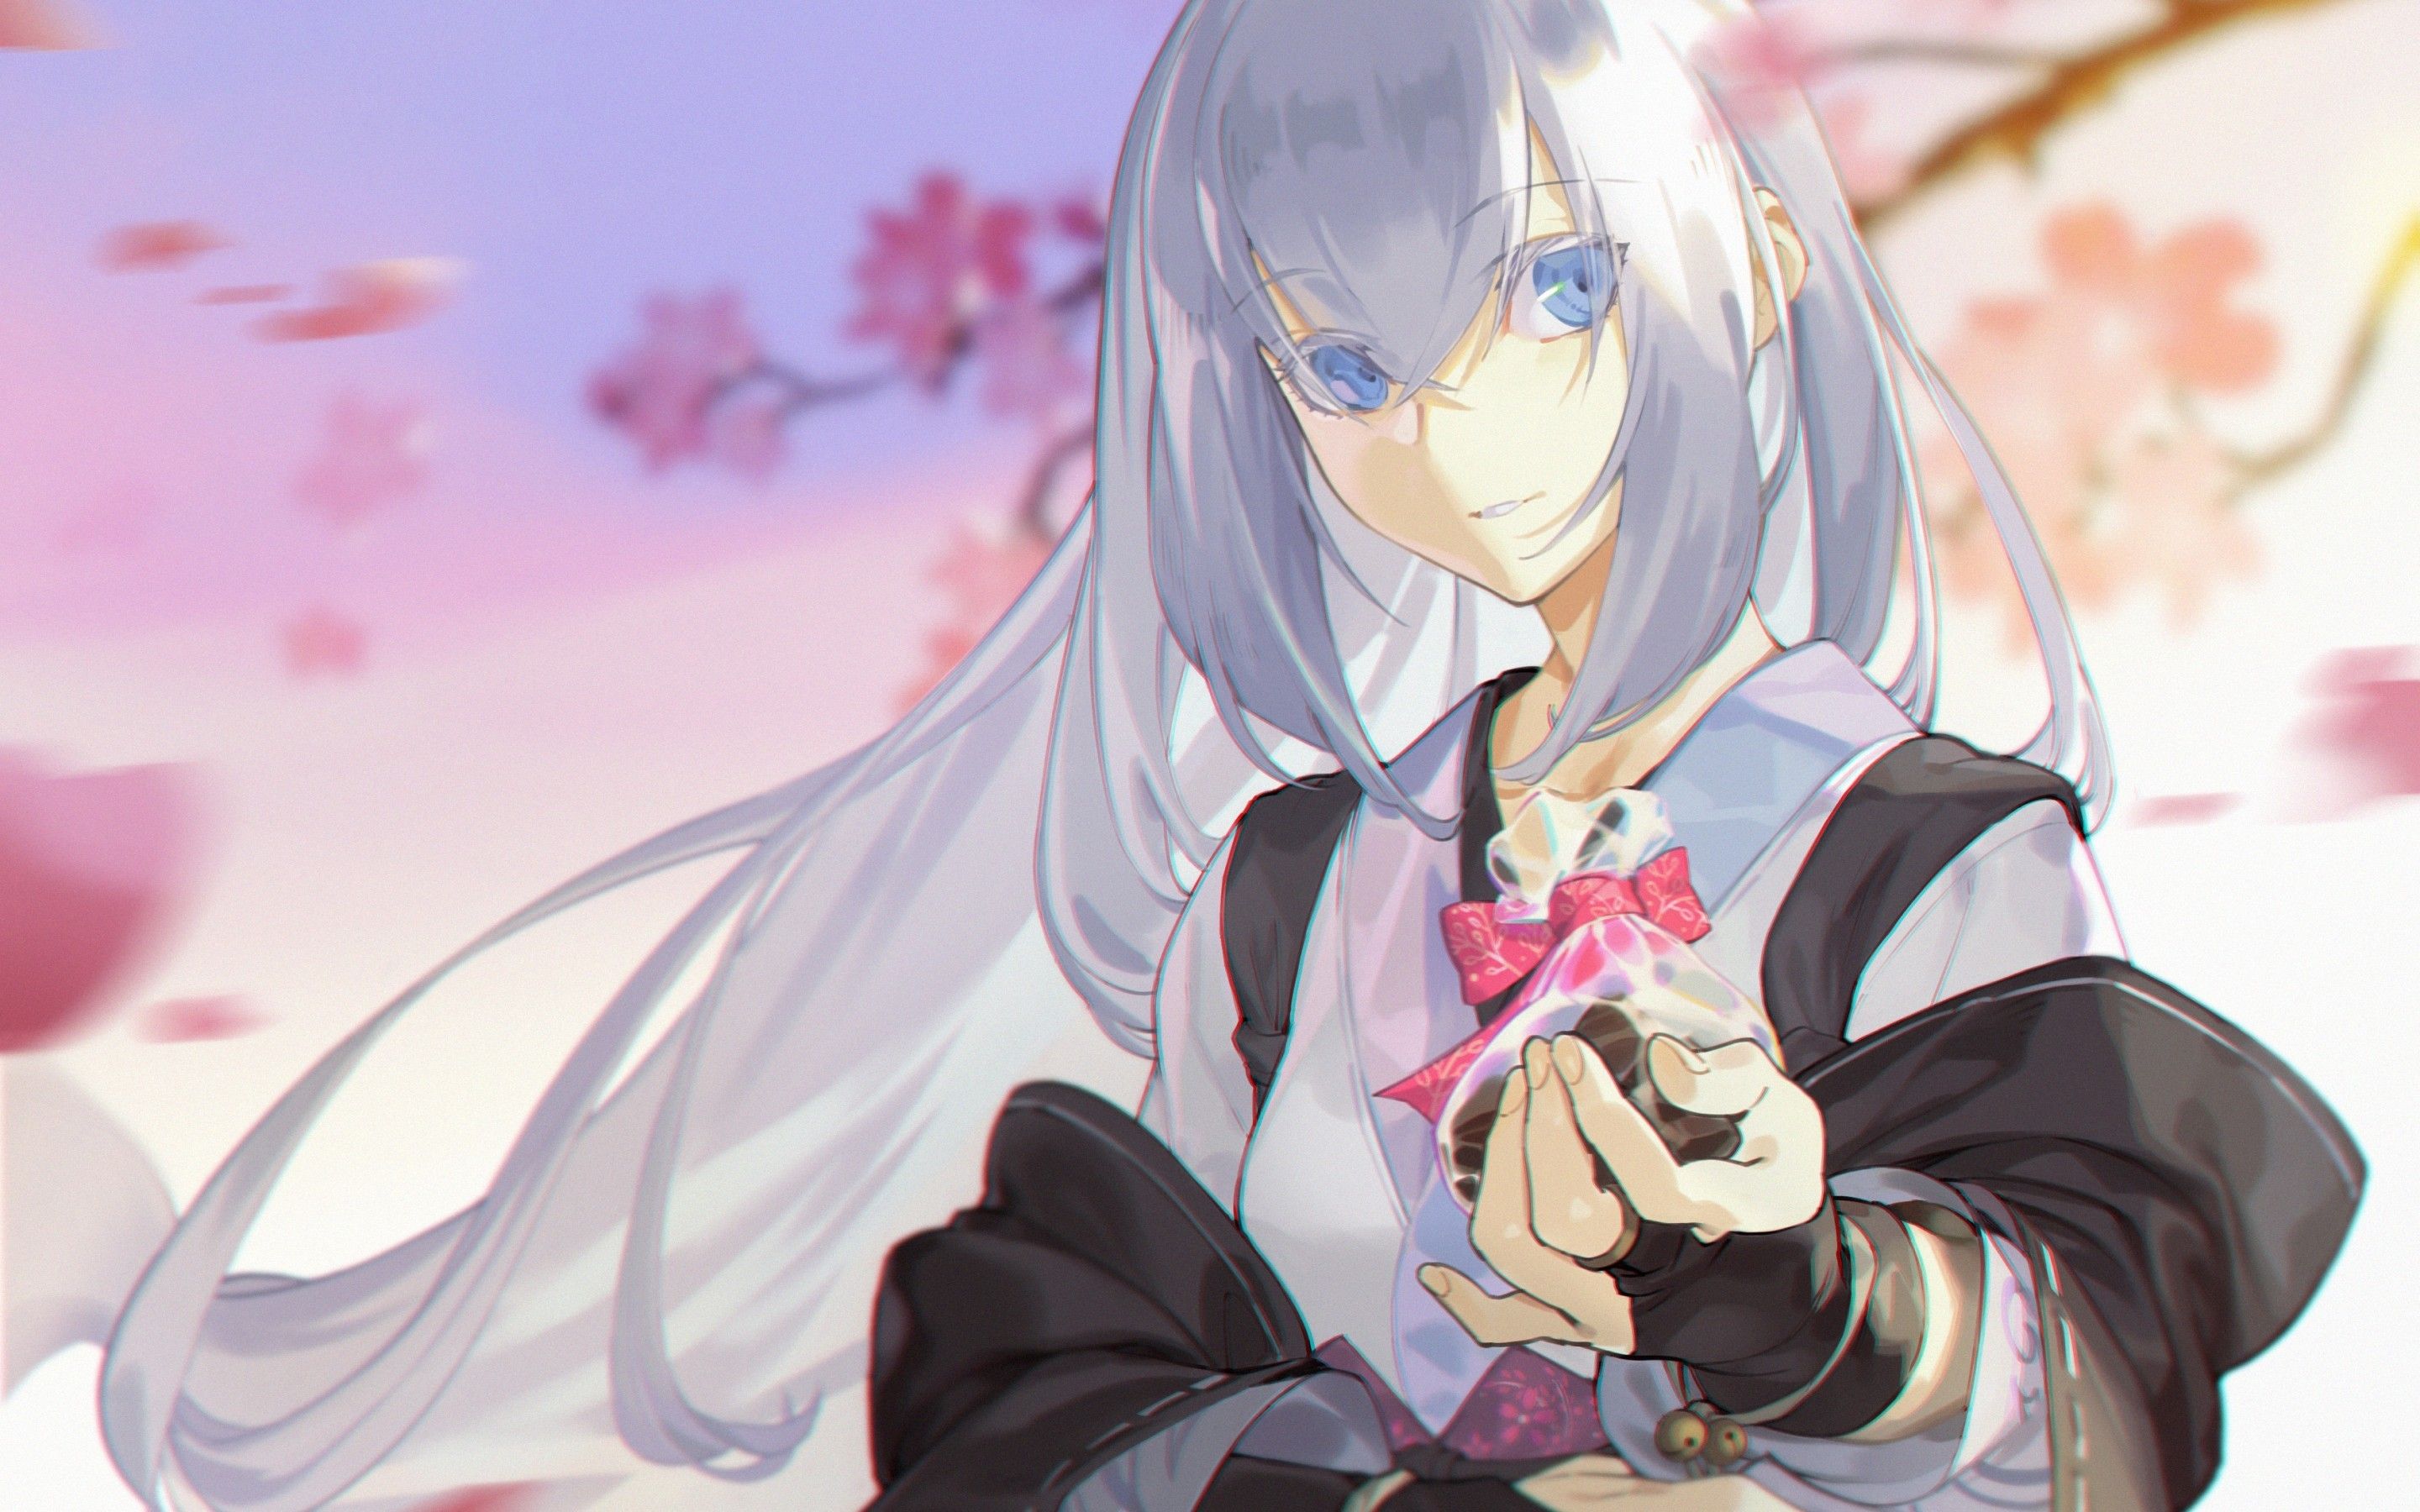 Download 2880x1800 Anime Girl, White Hair, Cherry Blossom, Wind